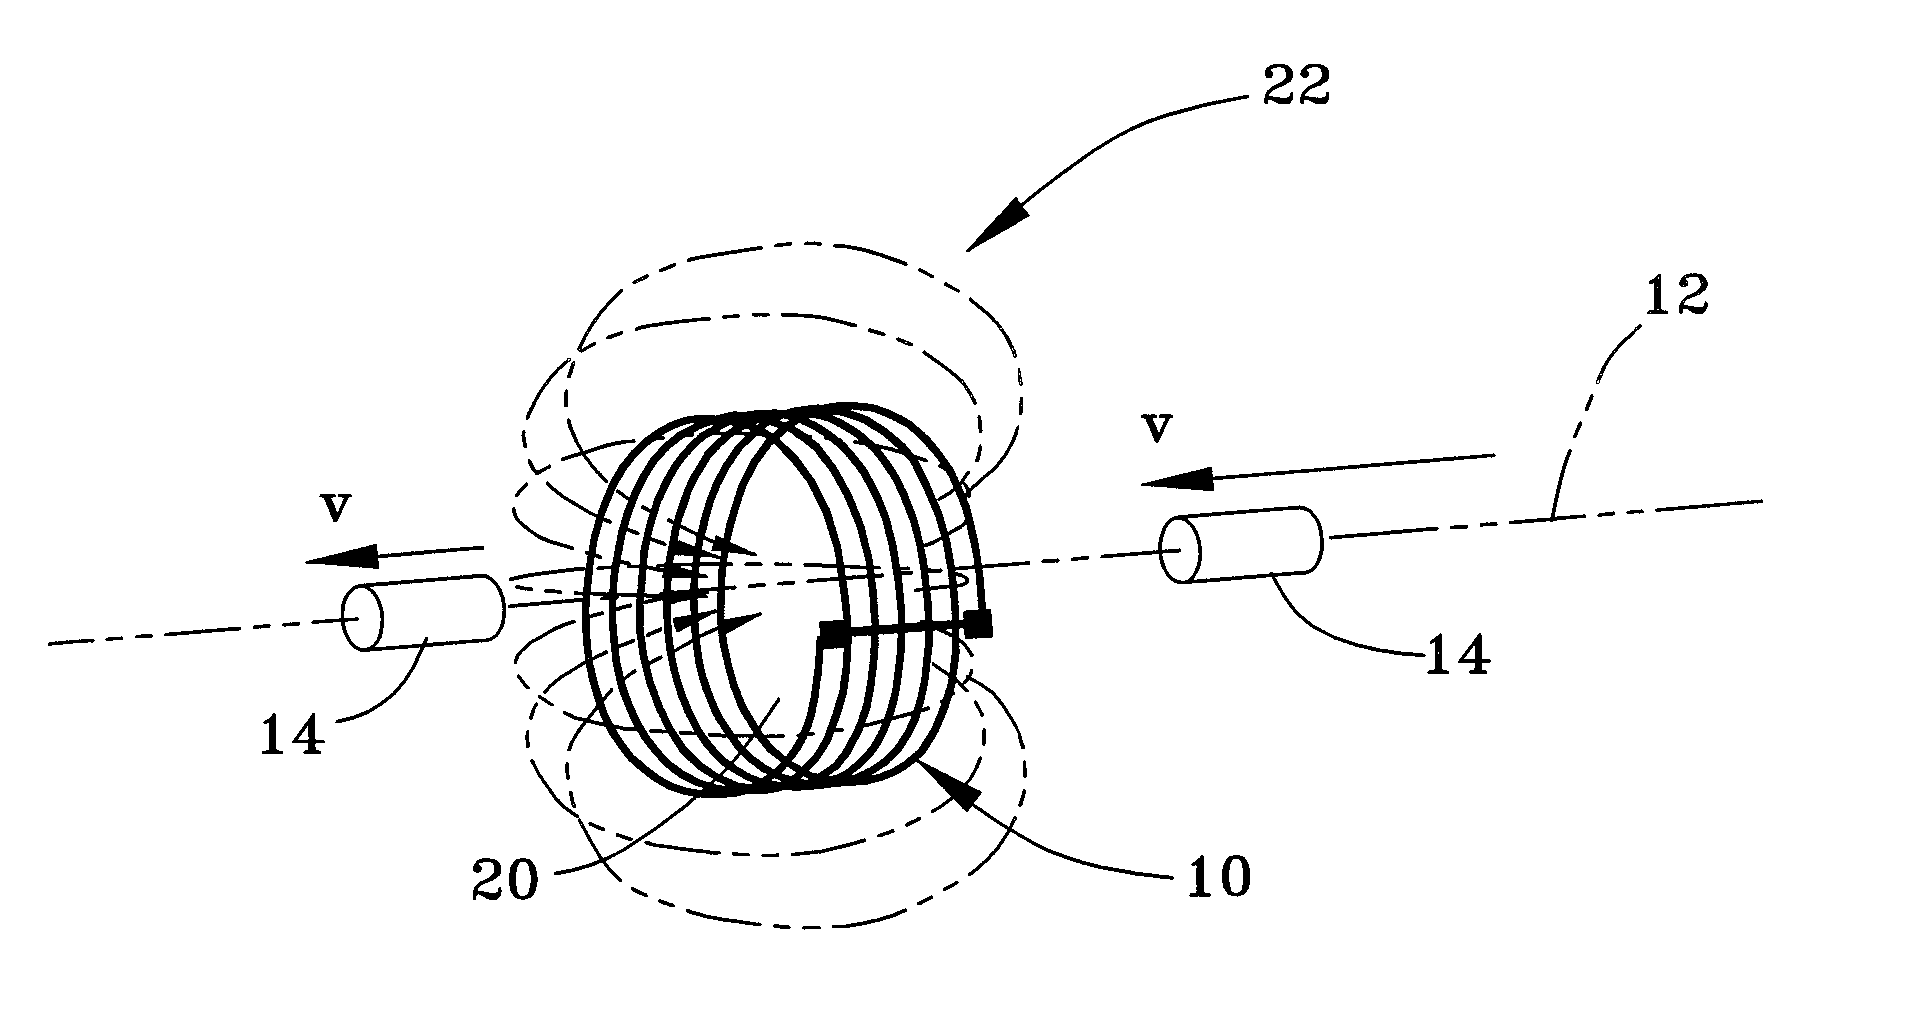 Apparatus and method for maneuvering objects in low/zero gravity environments